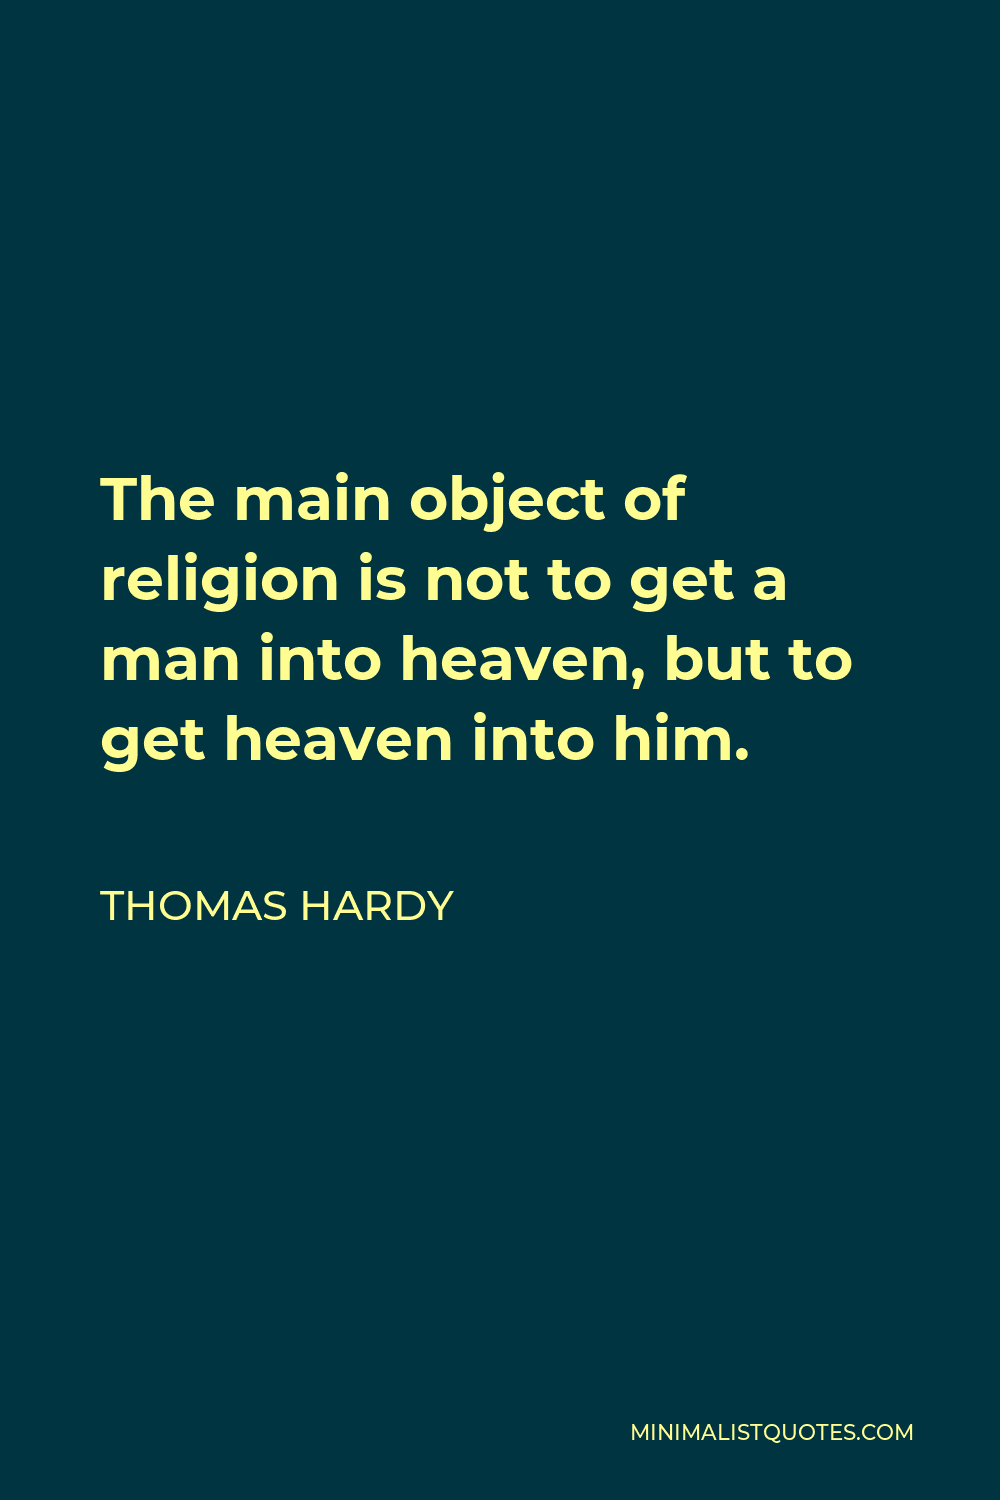 Thomas Hardy Quote - The main object of religion is not to get a man into heaven, but to get heaven into him.